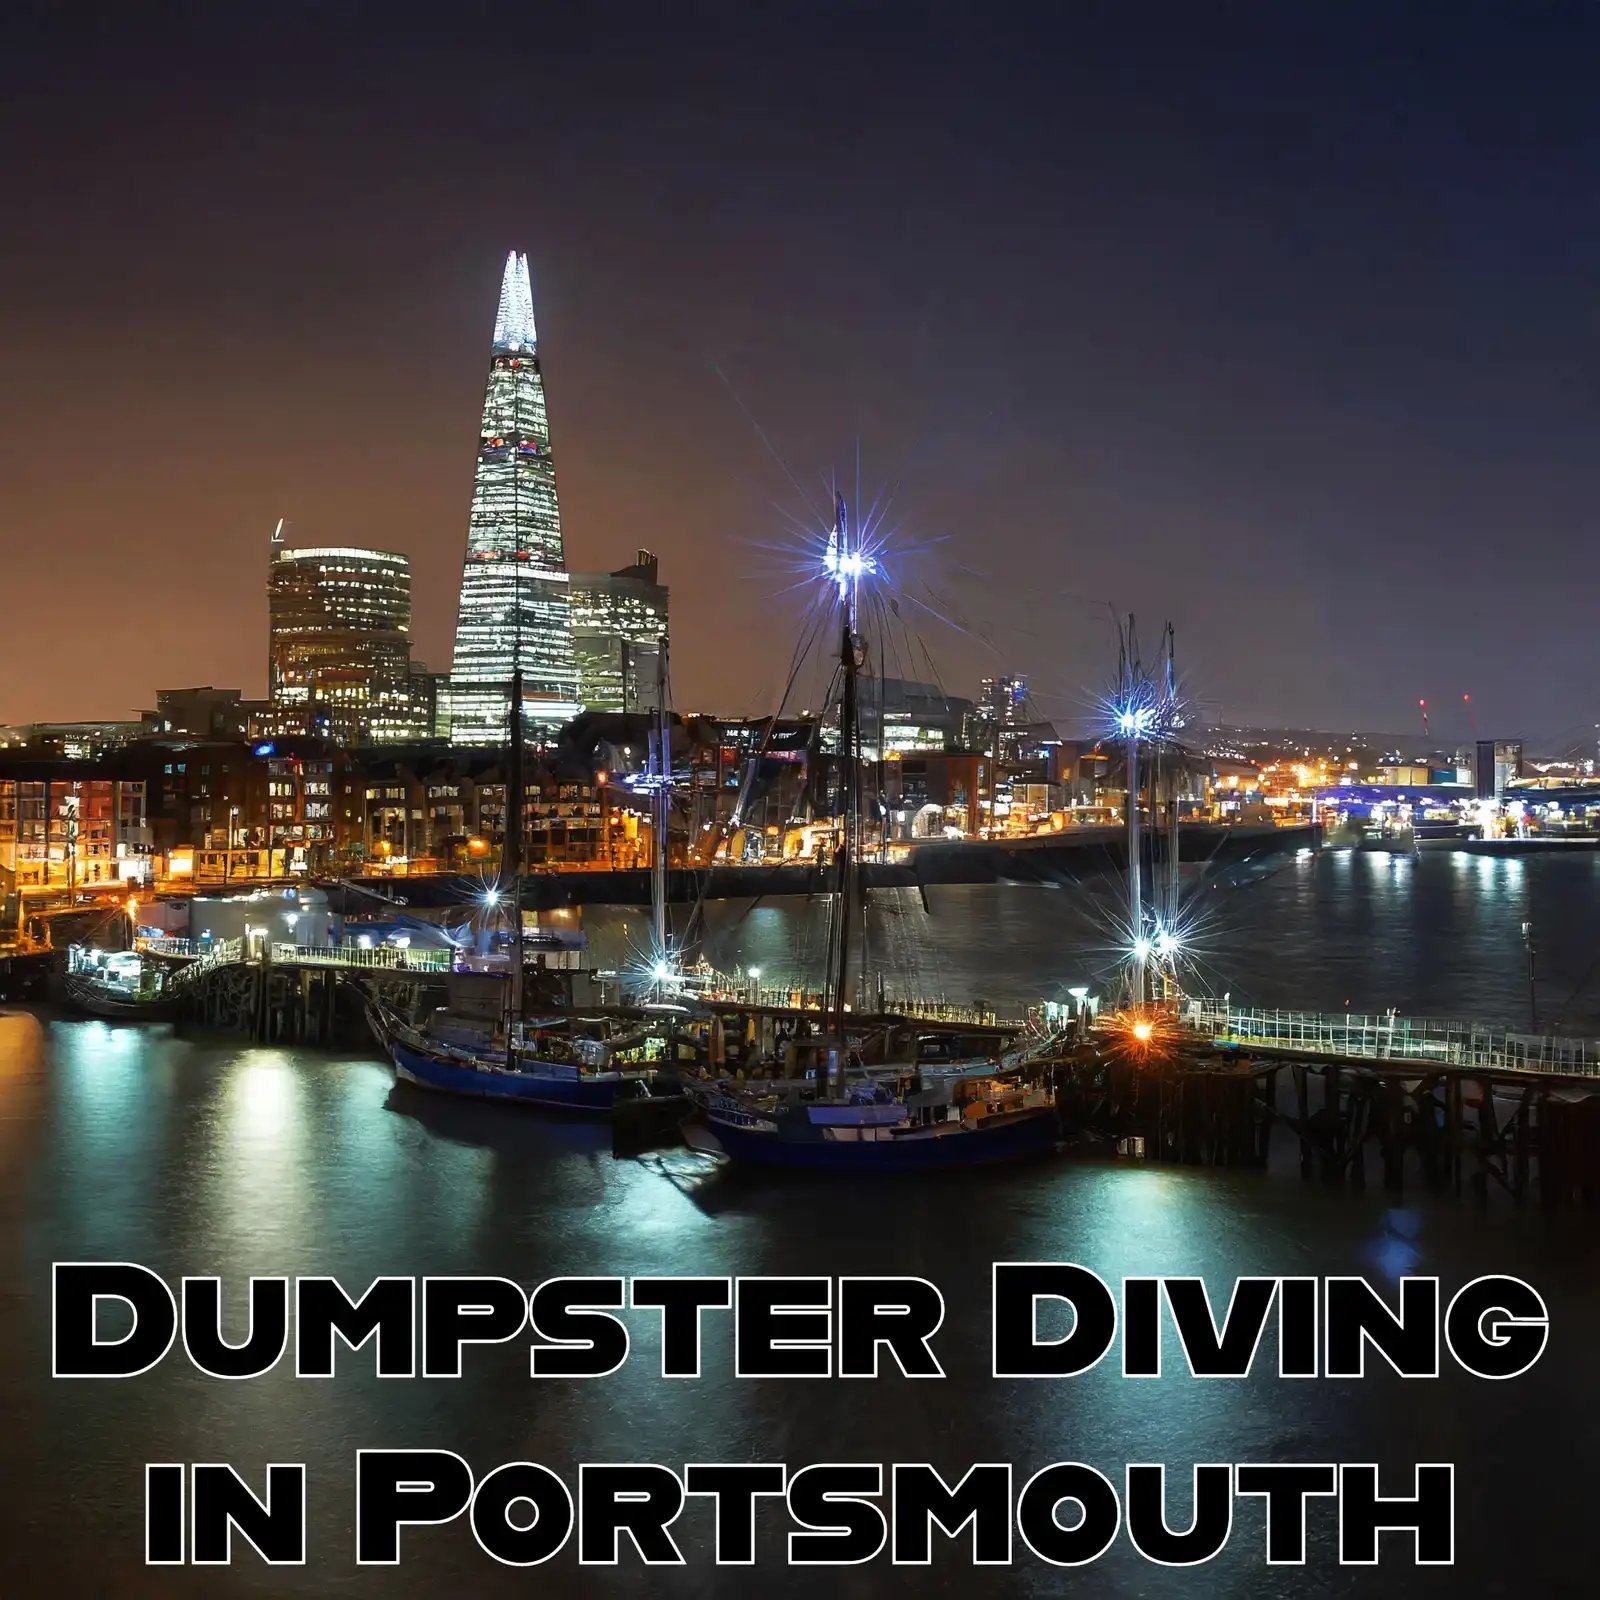 Nighttime city waterfront with lit buildings and docked sailboats, text "Dumpster Diving in Portsmouth."